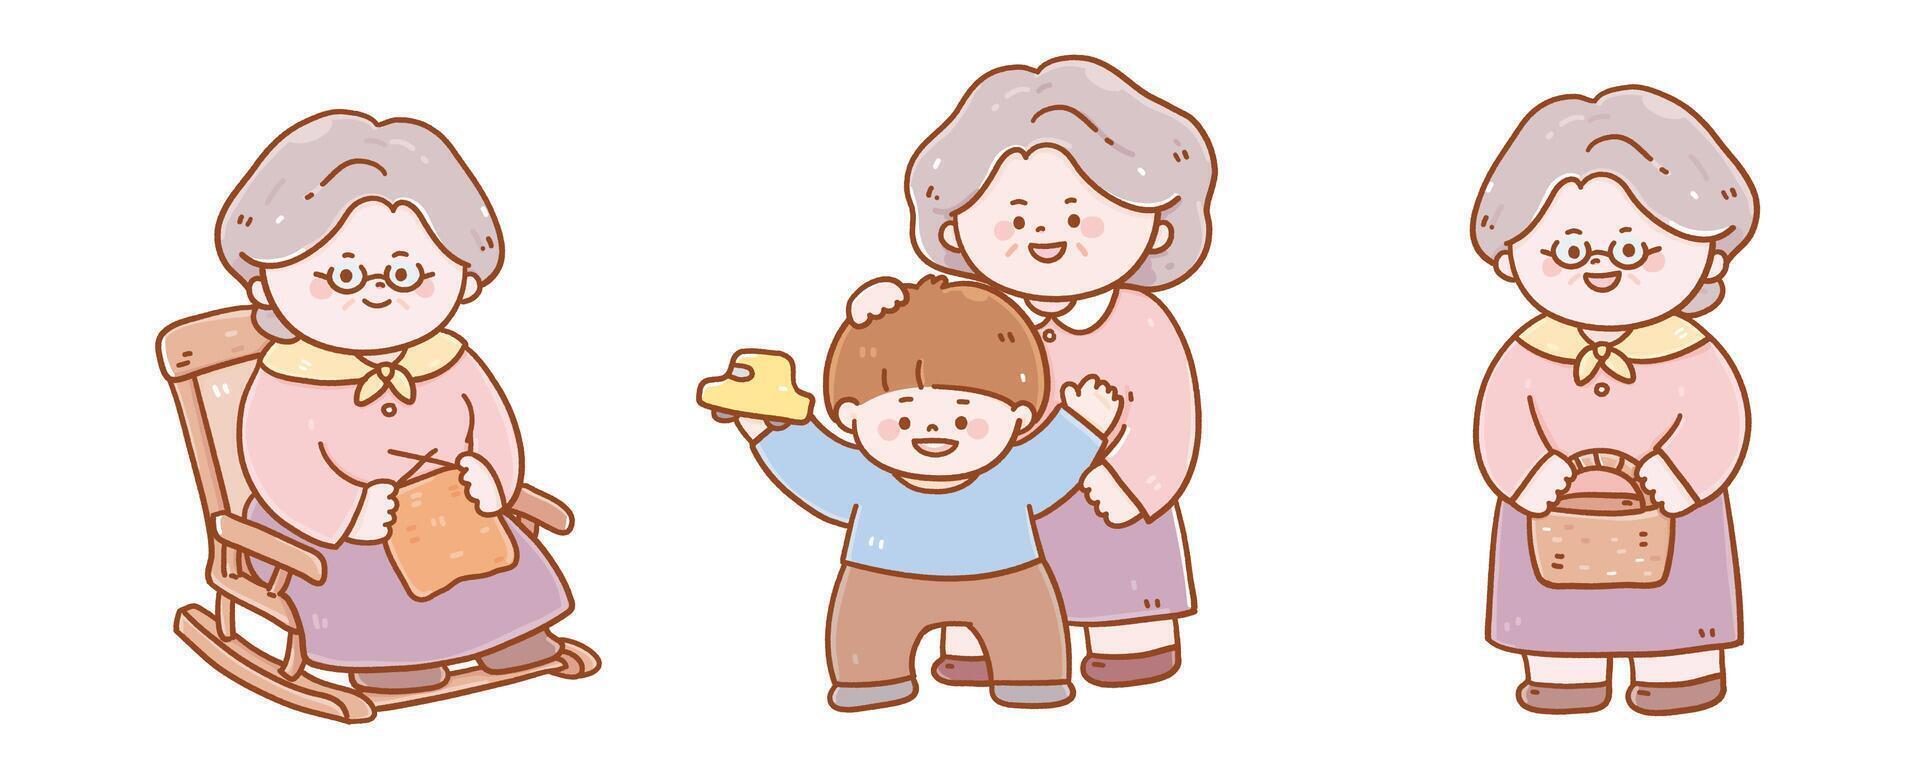 Vector cute illustration style. Happy kindergarten boy holding car toy, woman leisurely knitting and shopping